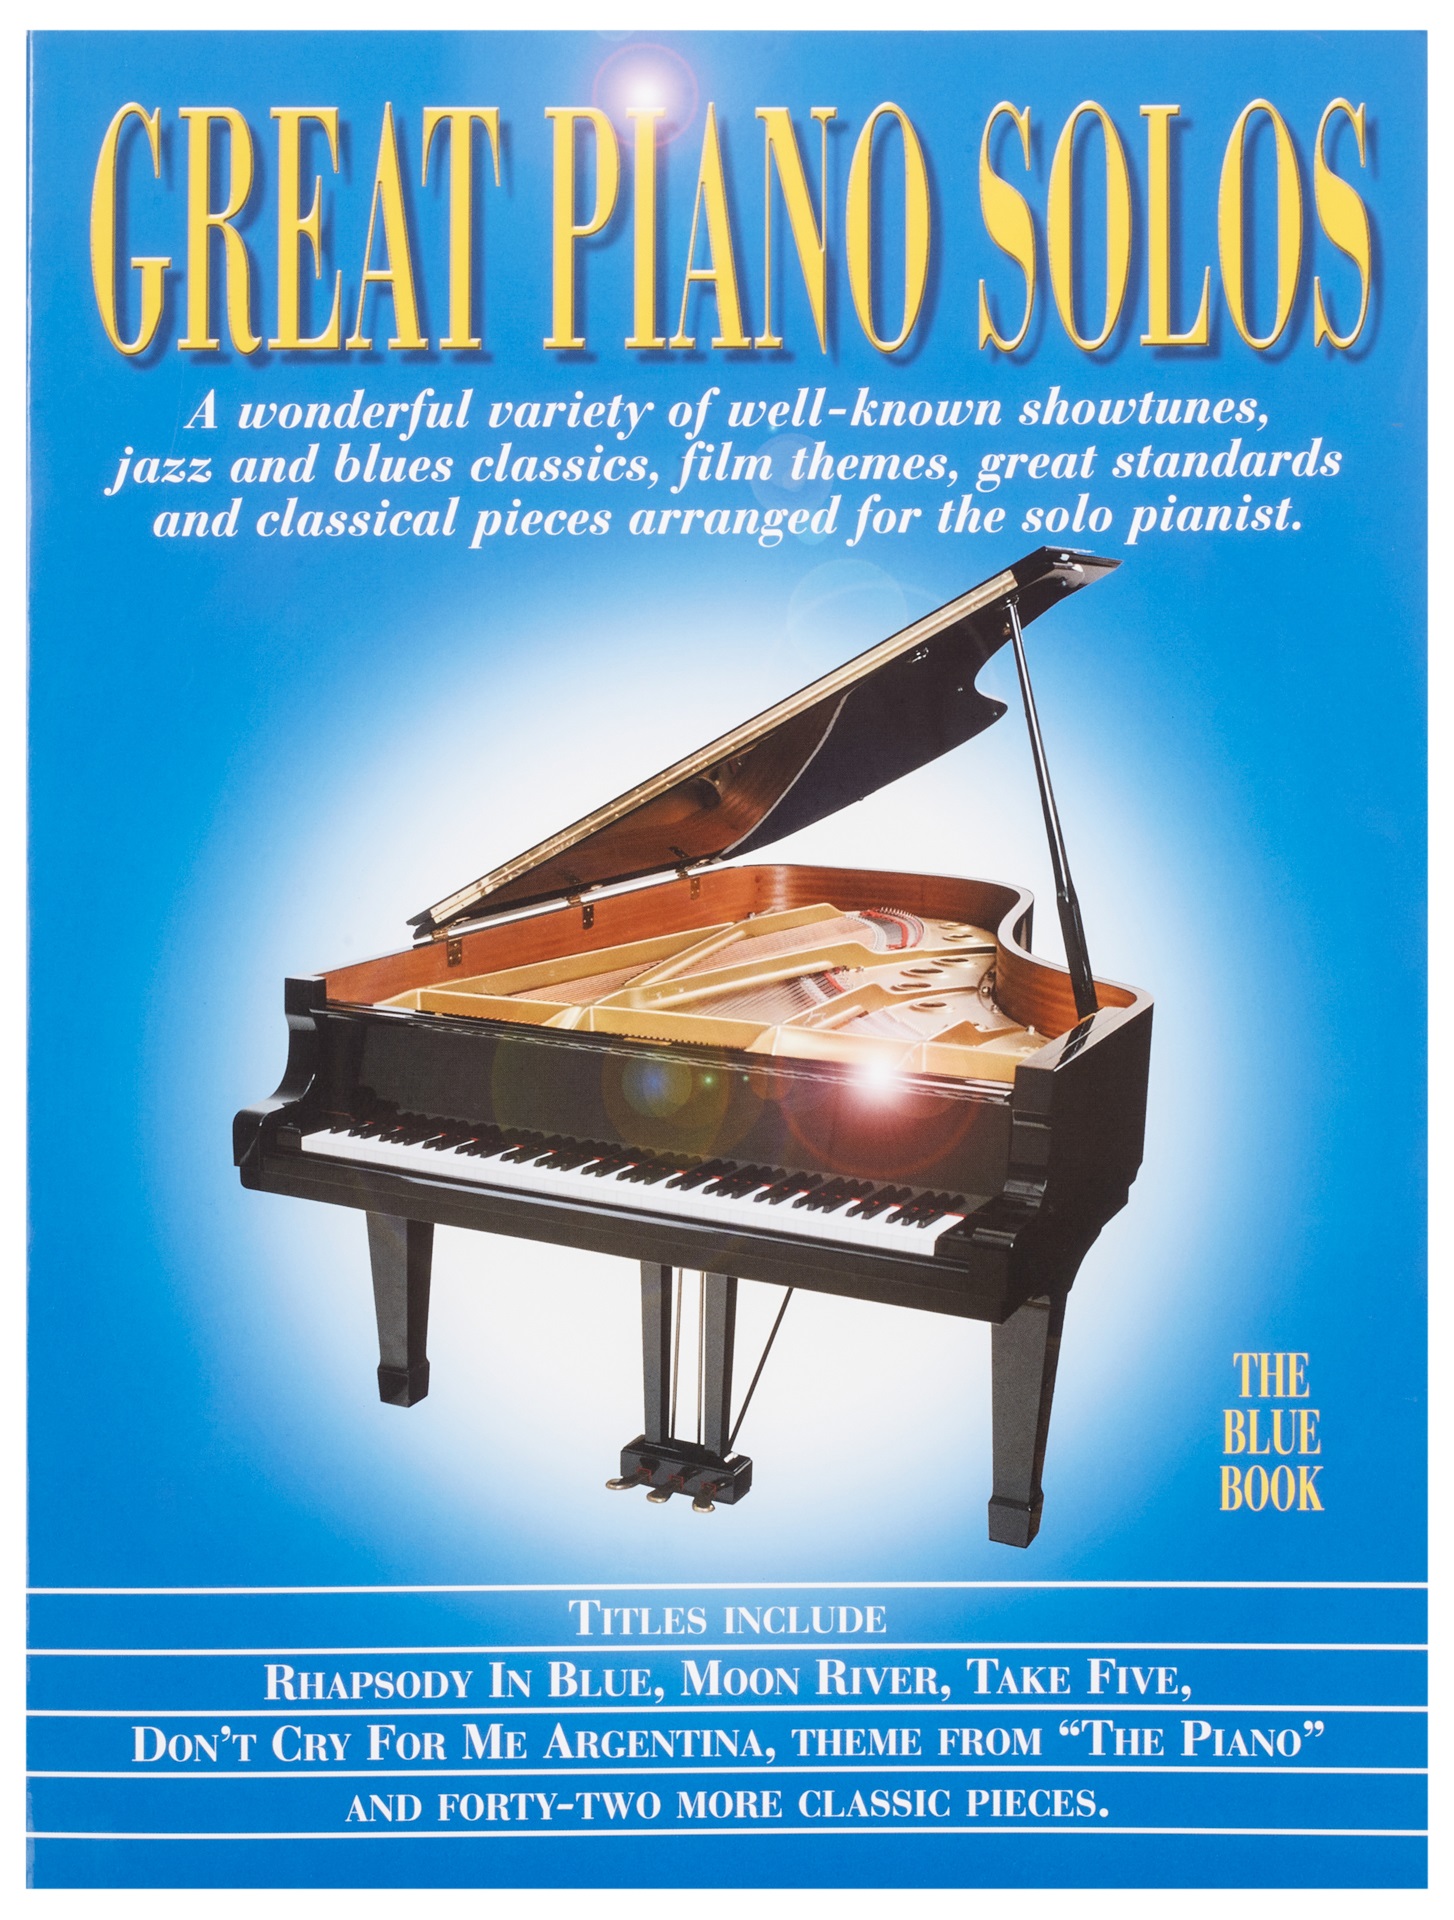 MS Great Piano Solos - The Blue Book